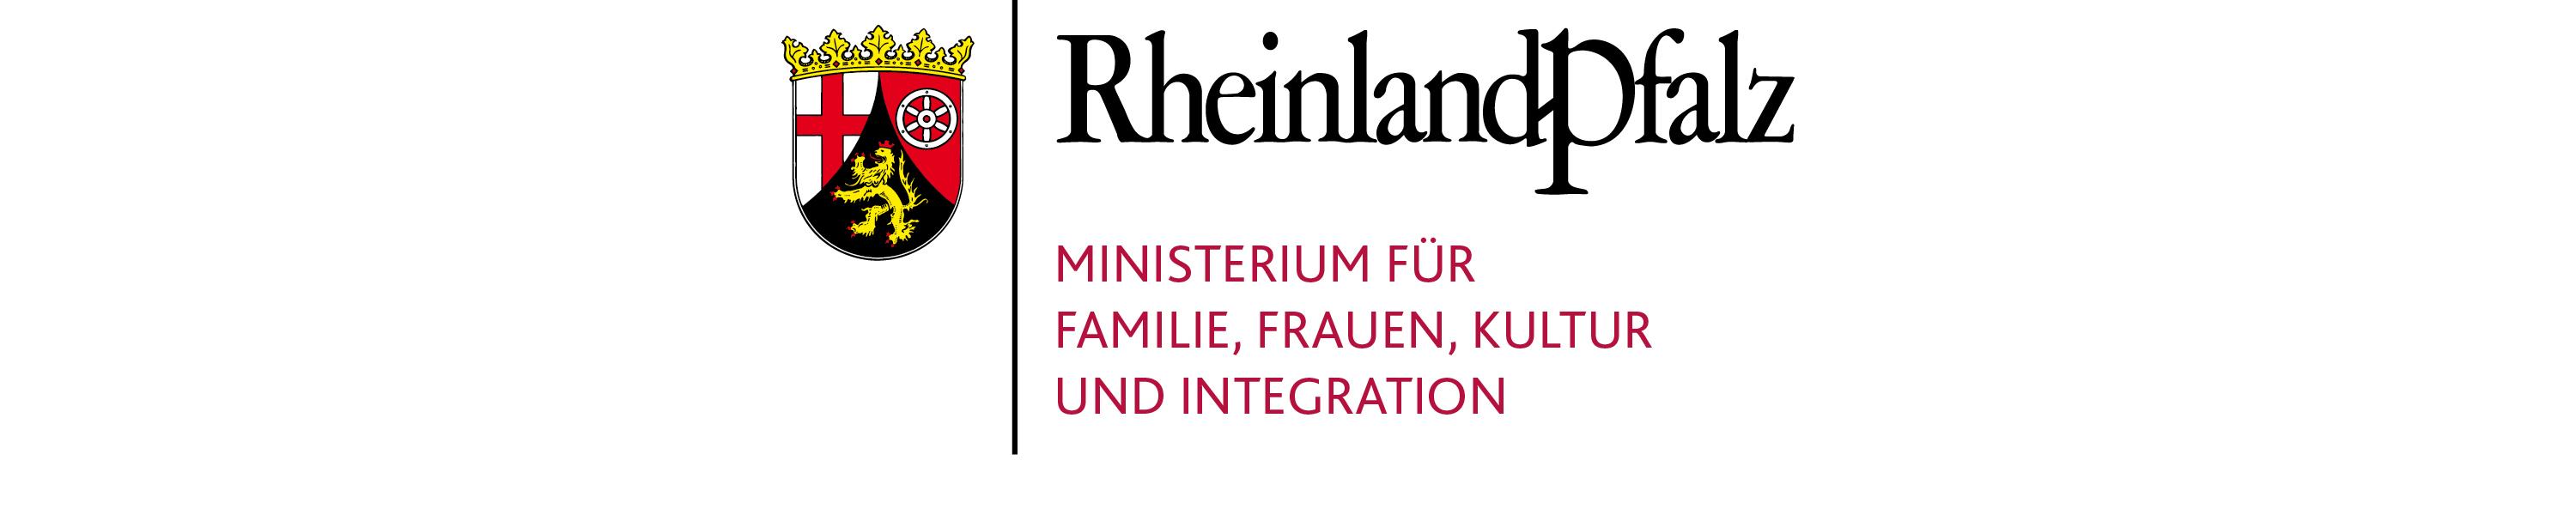 Rhineland-Palatinate Ministry for Family Affairs, Women, Culture and Integration